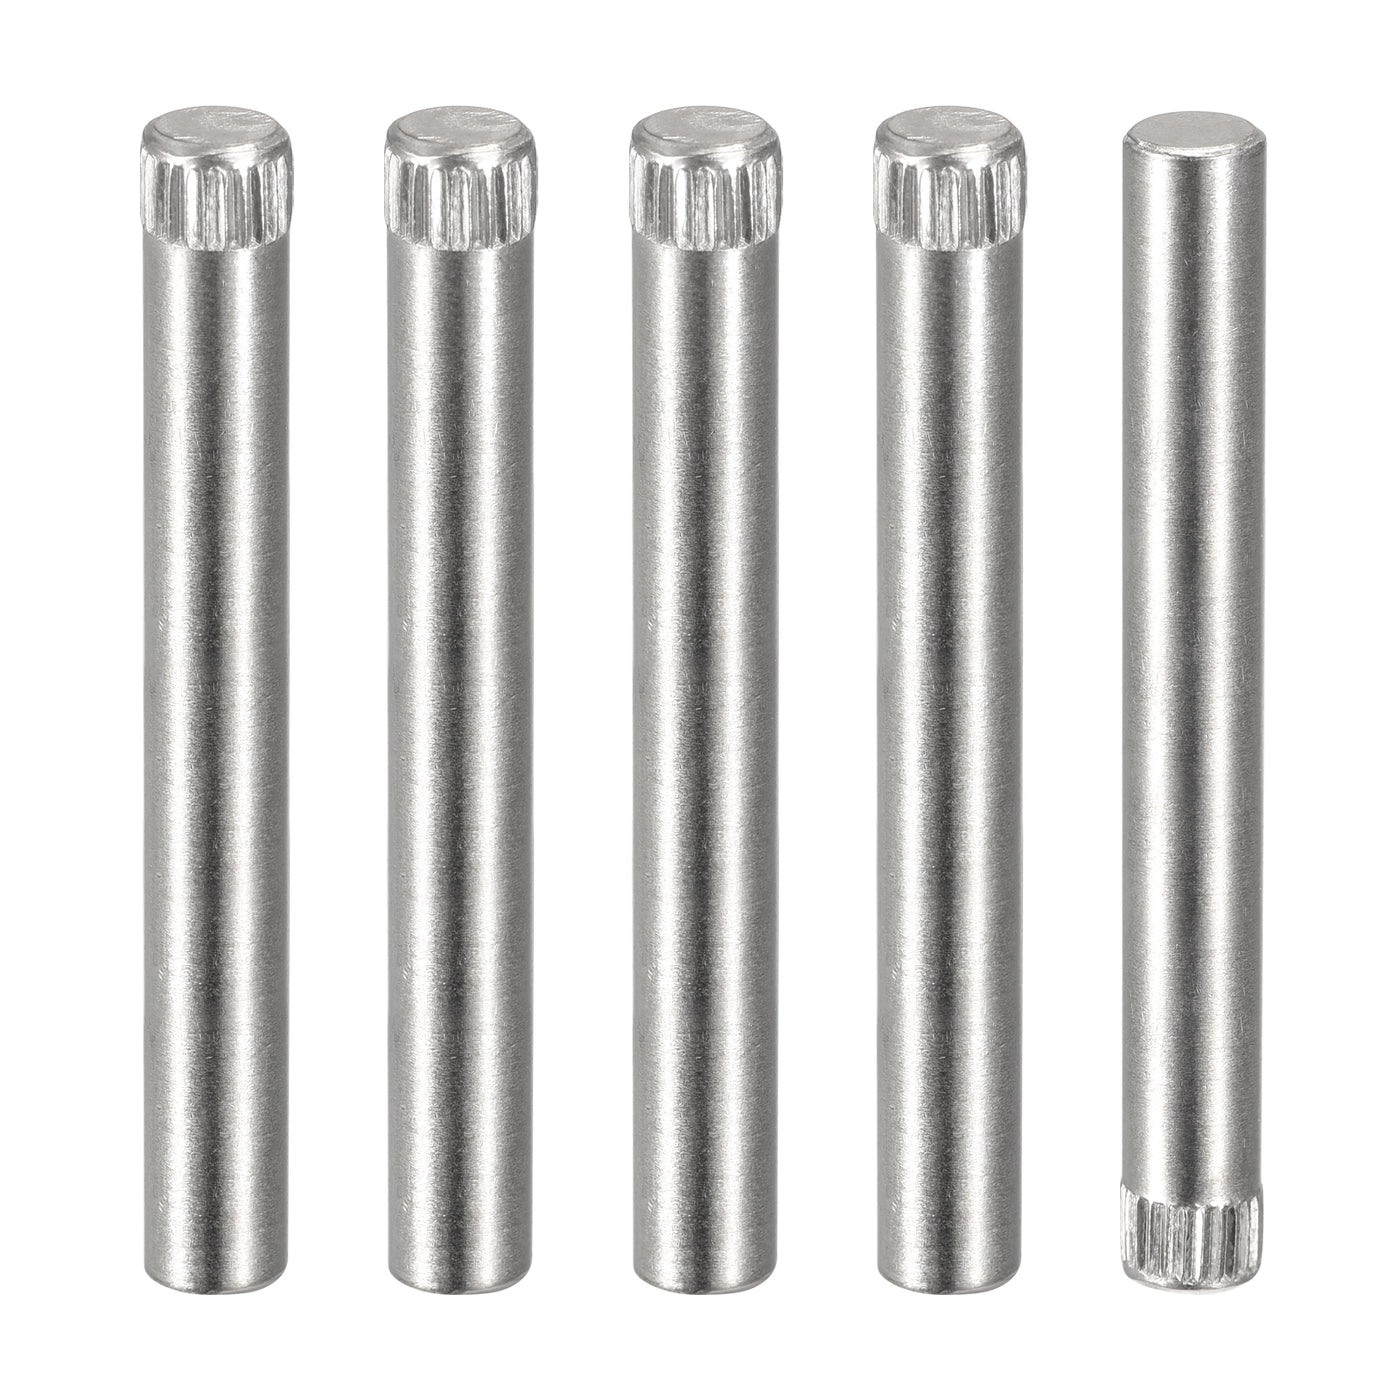 uxcell Uxcell 6x50mm 304 Stainless Steel Dowel Pins, 5Pcs Knurled Head Flat End Dowel Pin